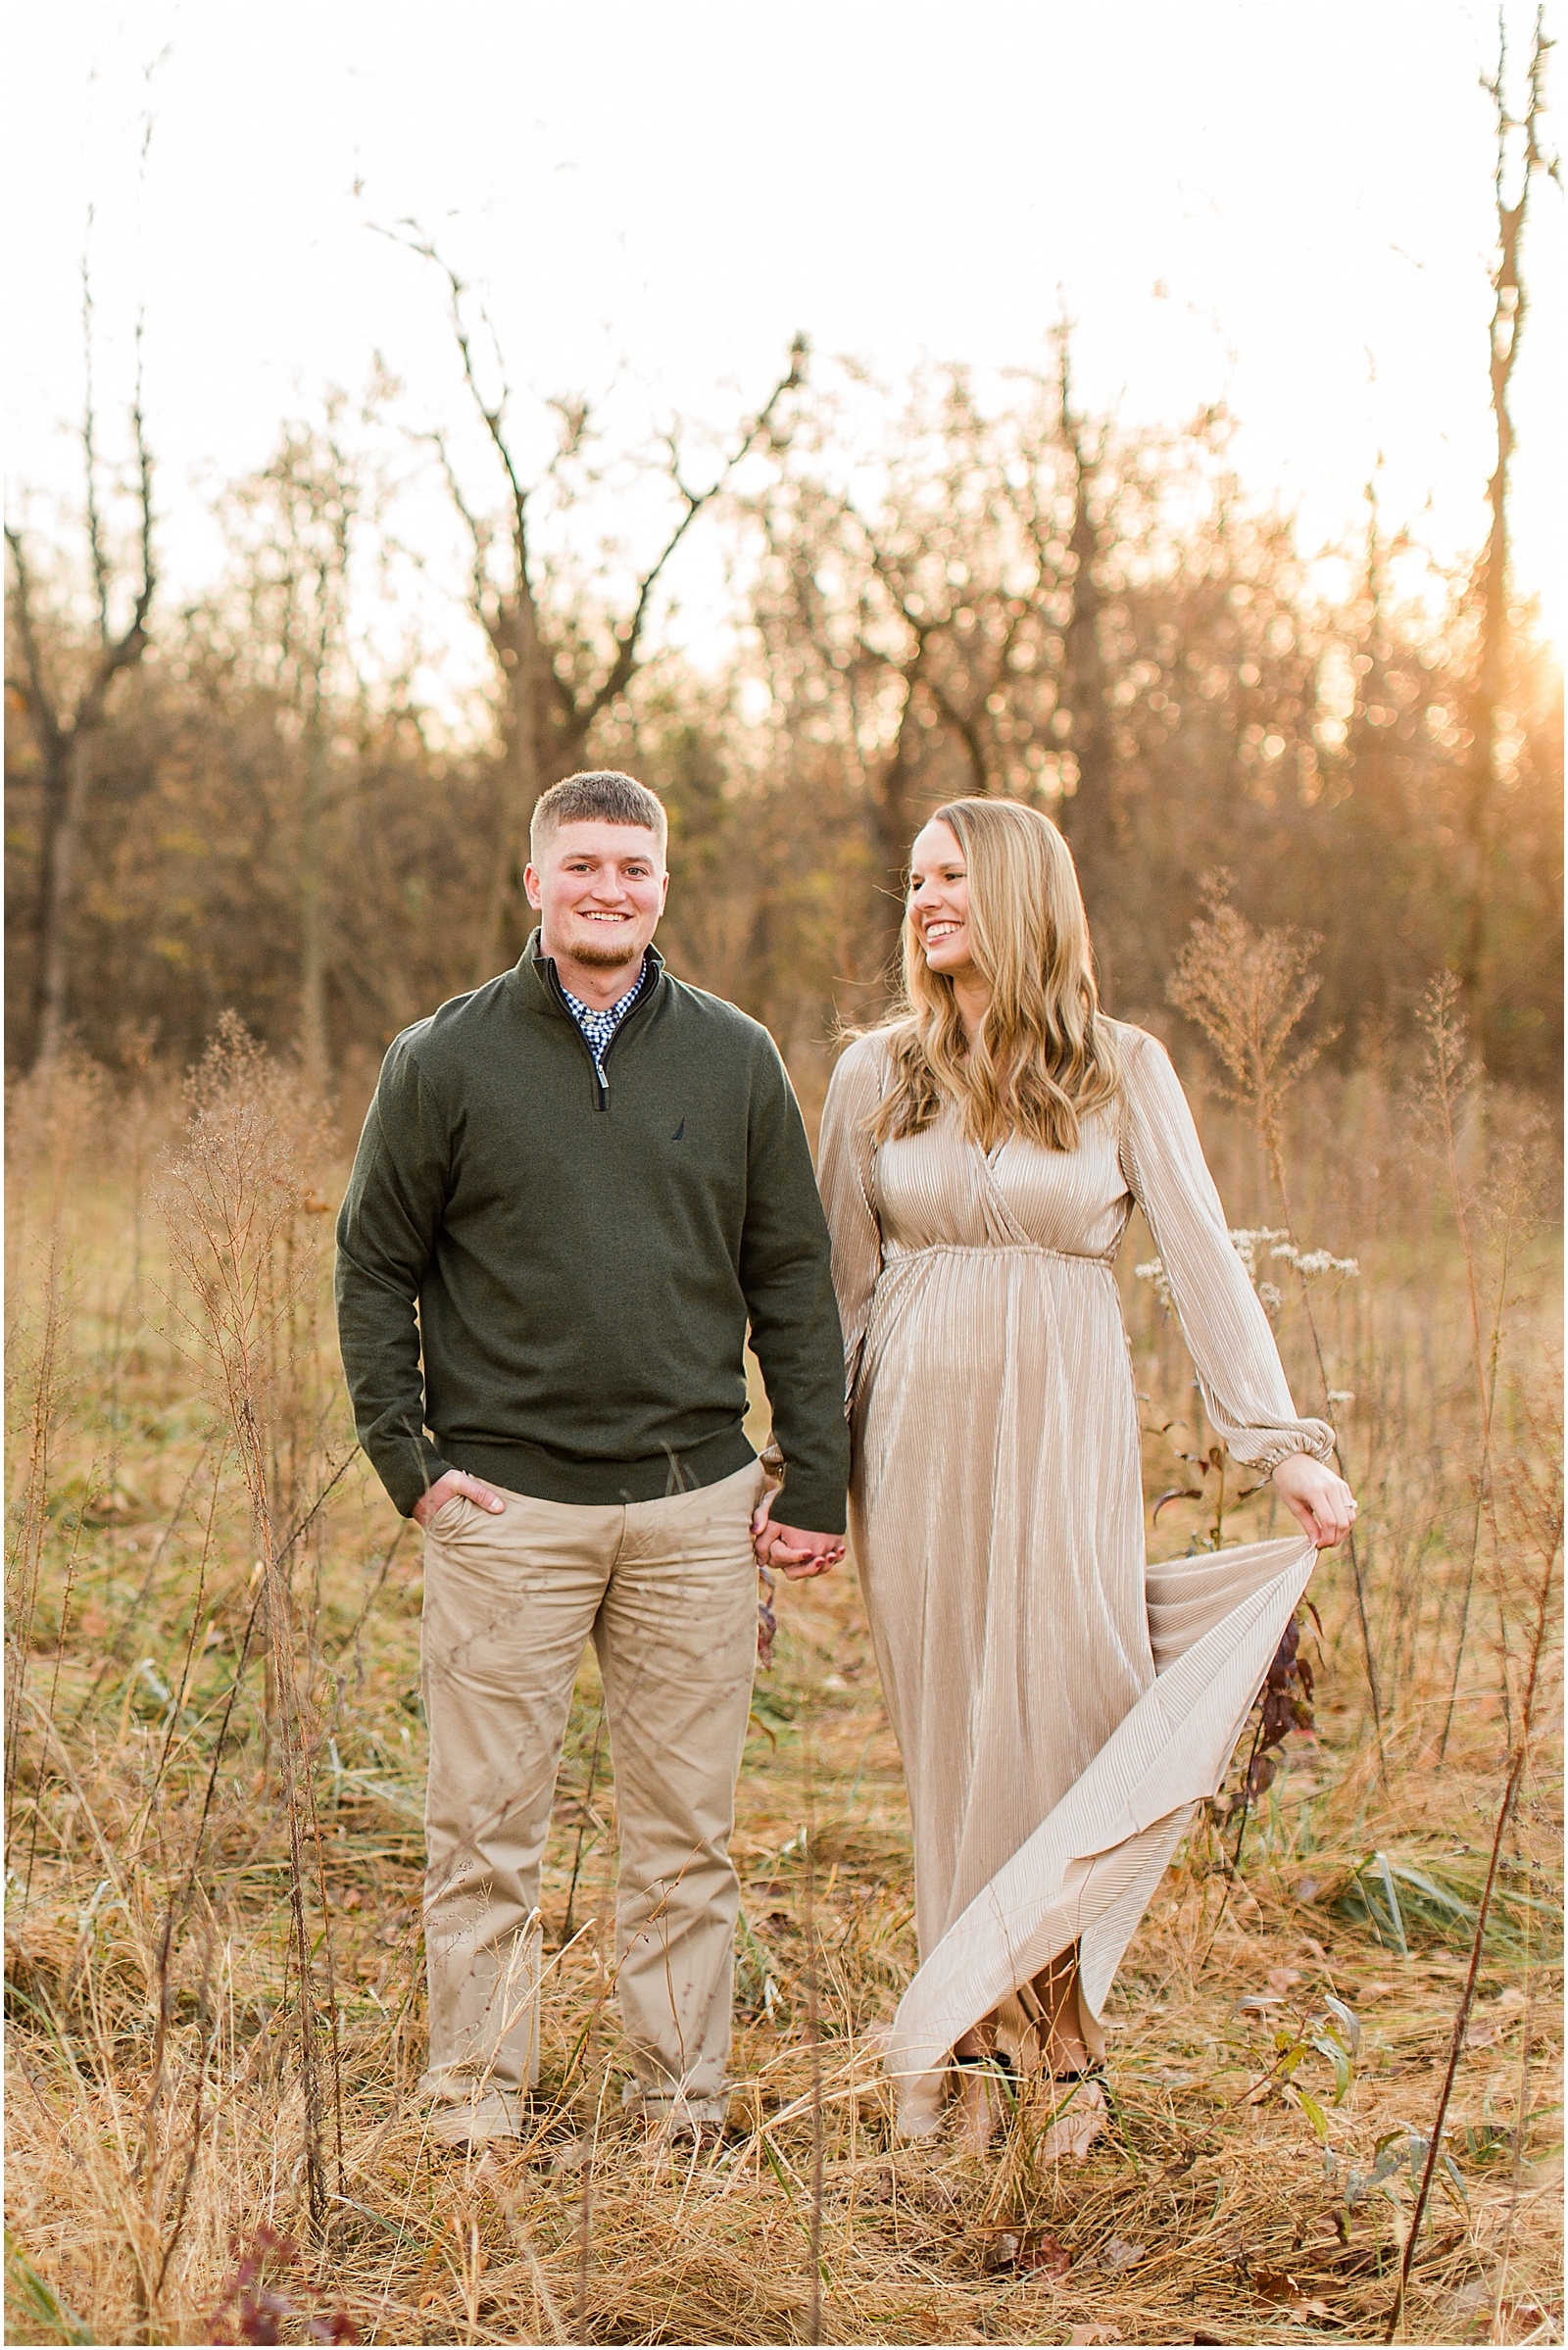 A Fall Southern Indiana Engagement Seesion | Cody and Hannah | Bret and Brandie Photography 040.jpg